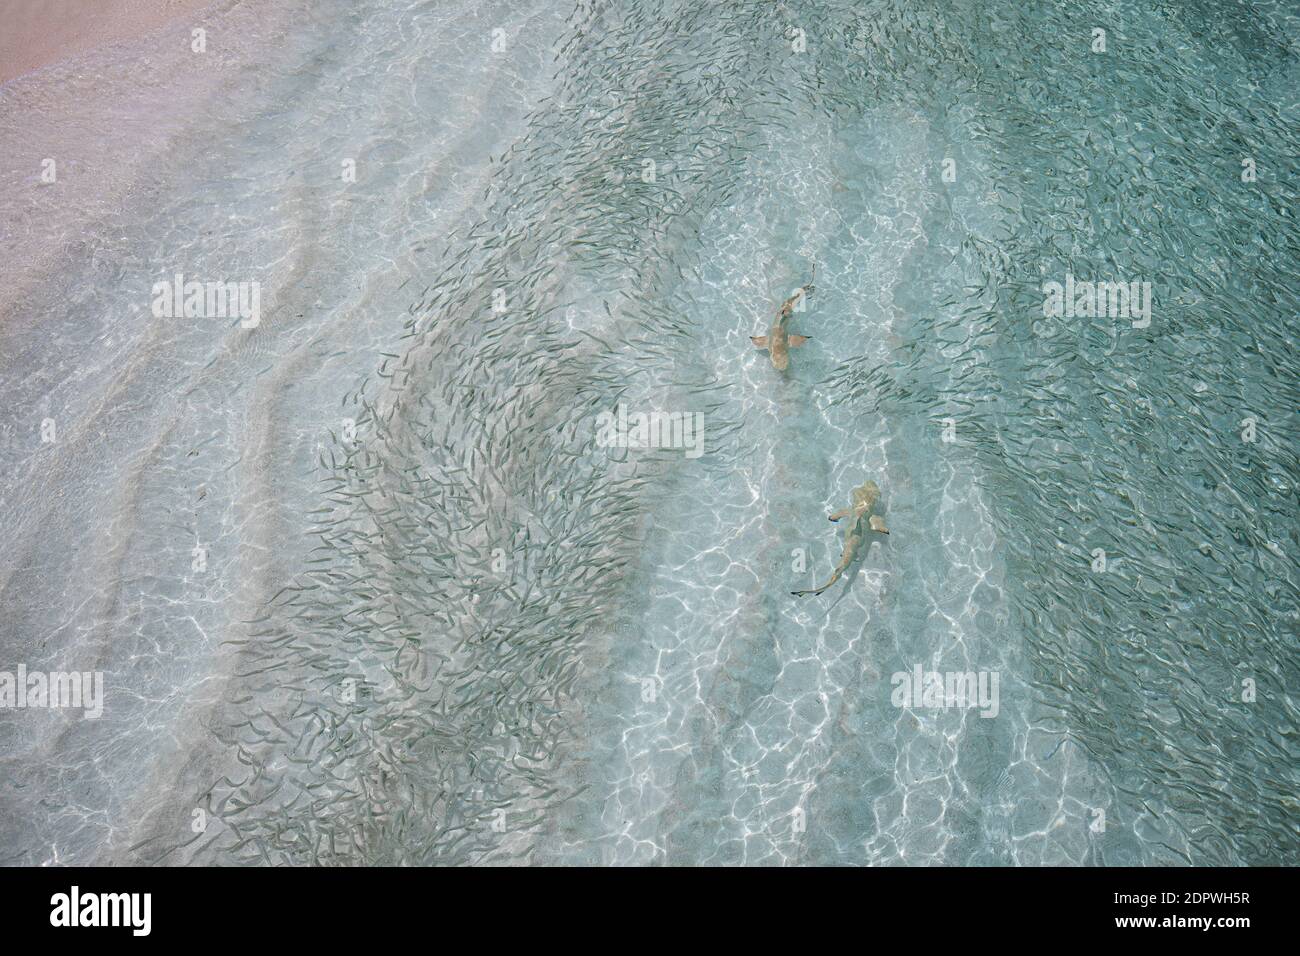 Blacktip Reef Shark hunting for fish. Sea life ecosystem. Wild baby black tip reef shark from above in tropical clear waters school of fish in shallow Stock Photo